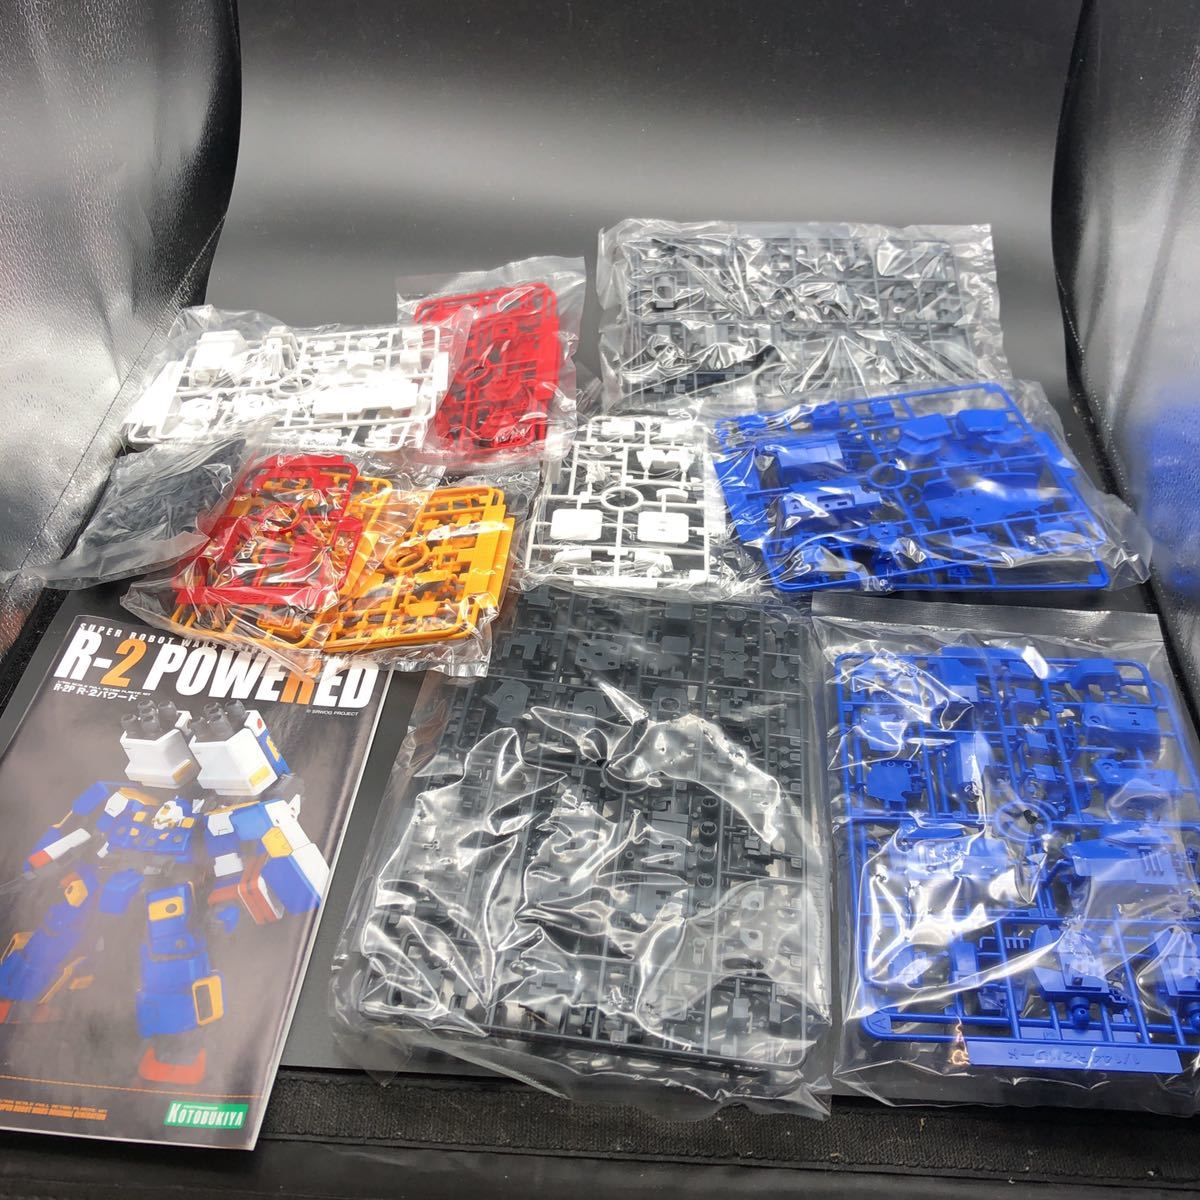  Kotobukiya records out of production 3 body set super . rare unused goods!S.R.G-S-017 020 015 R-2 power door rutoa before na is toR-1spa Robot not yet constructed 